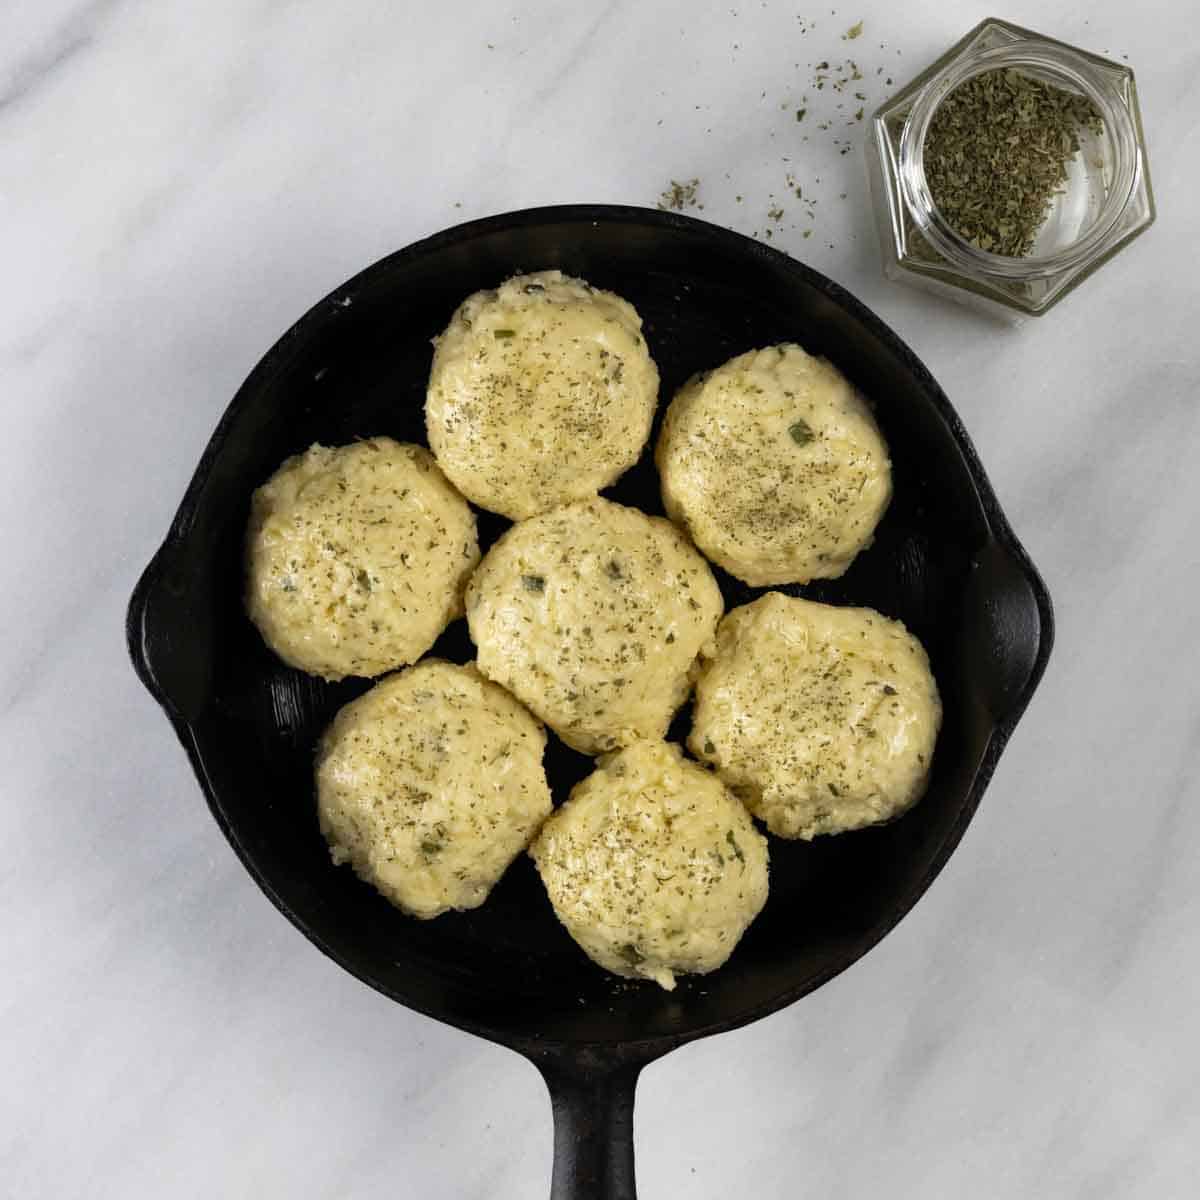 Balls of dough in a small cast iron pan topped with dried parsley and ready to bake.